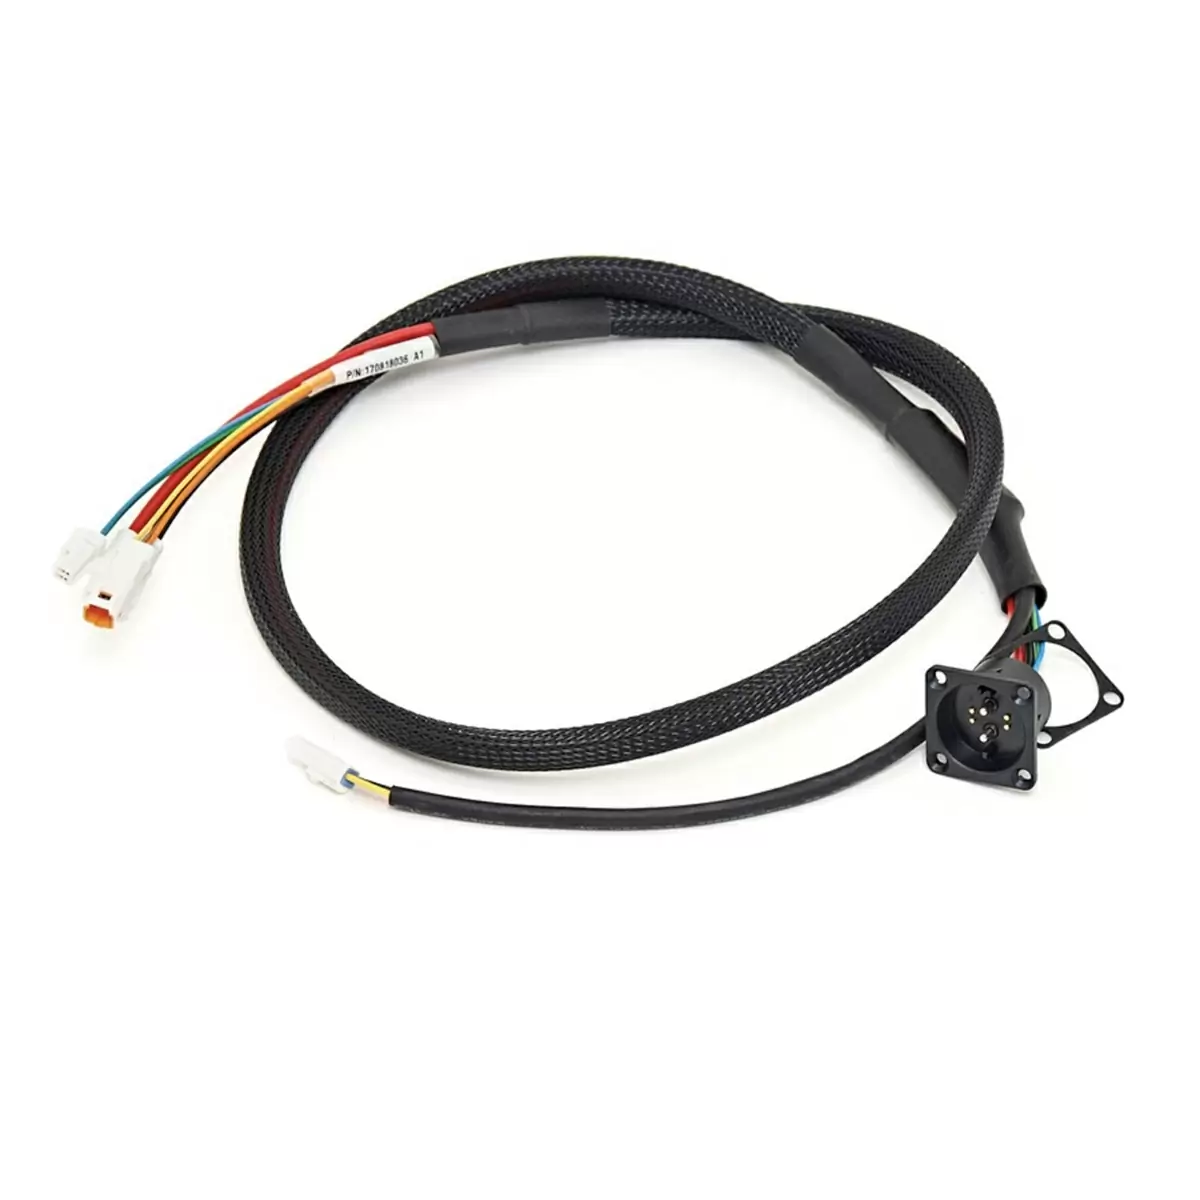 Ignition cable for Jam2 Shimano models - image